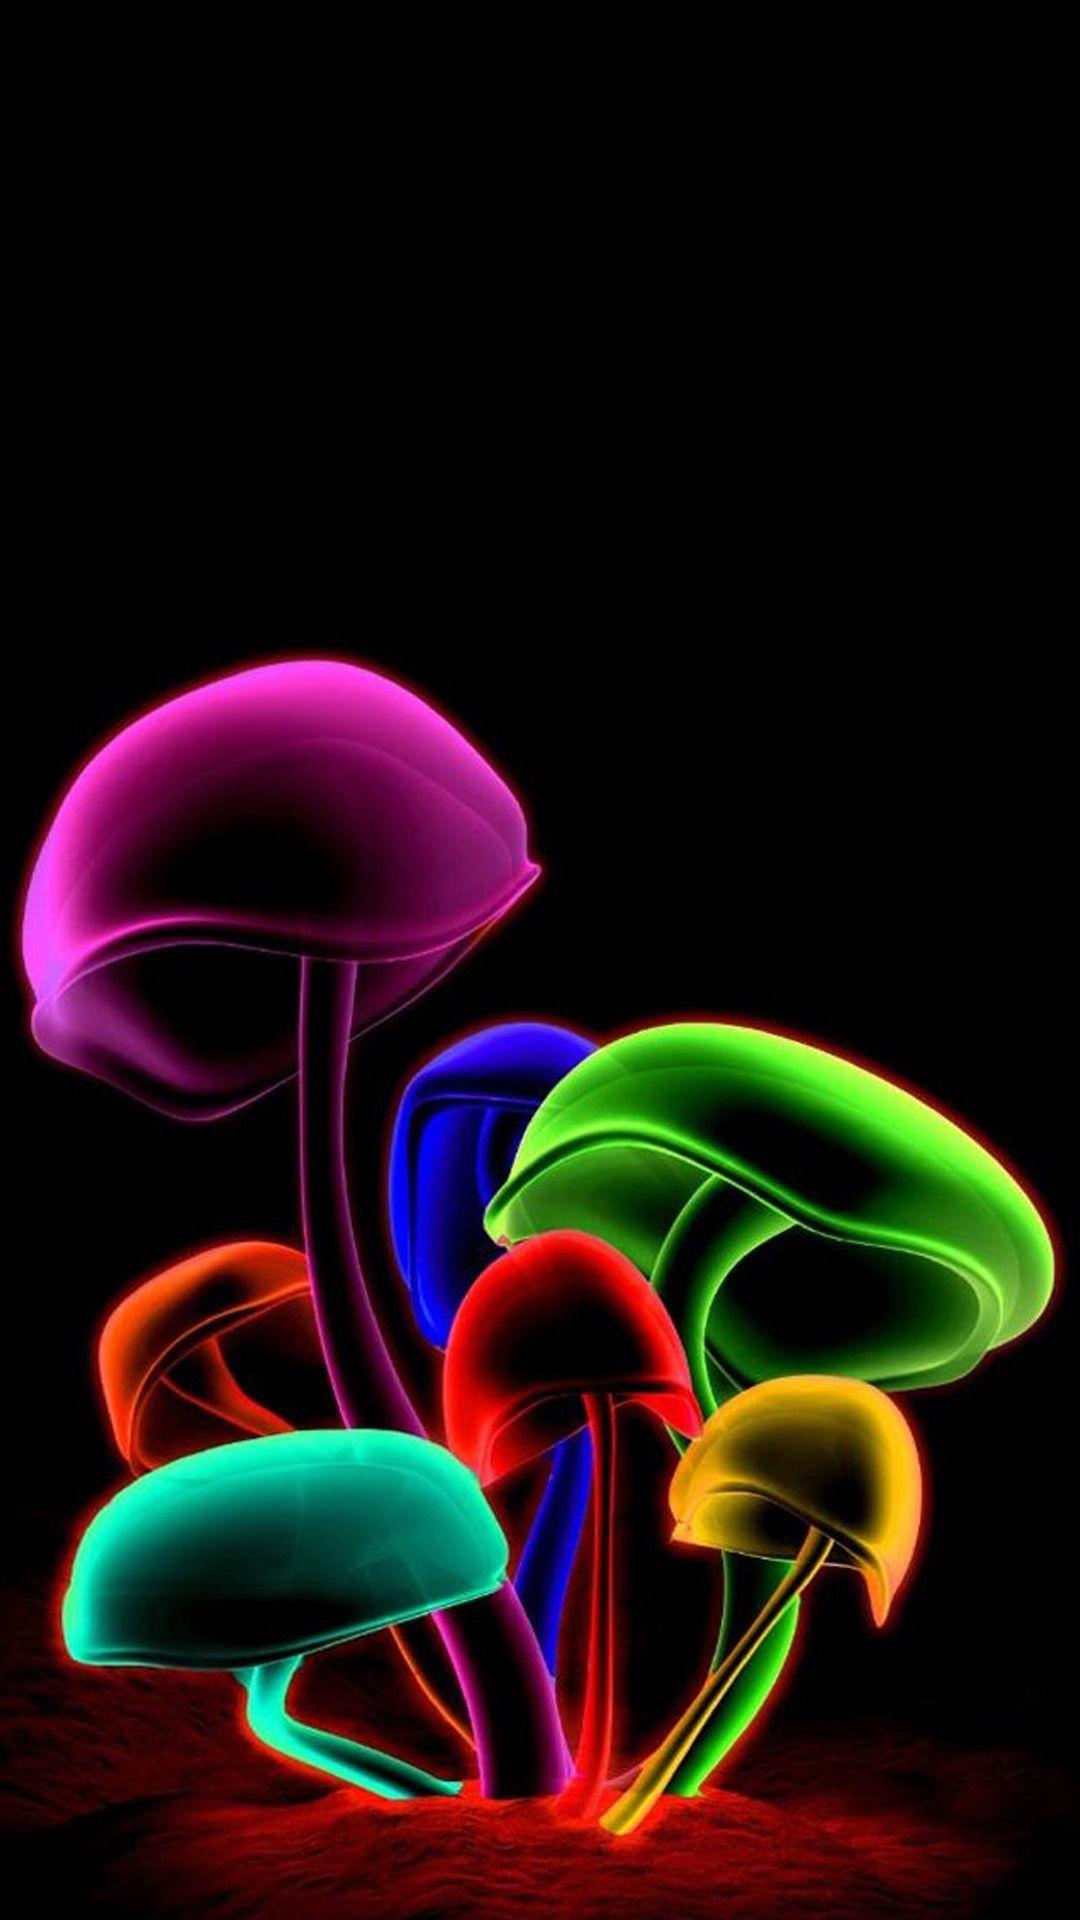 iPhone 6 3D Wallpapers - Top Free ...